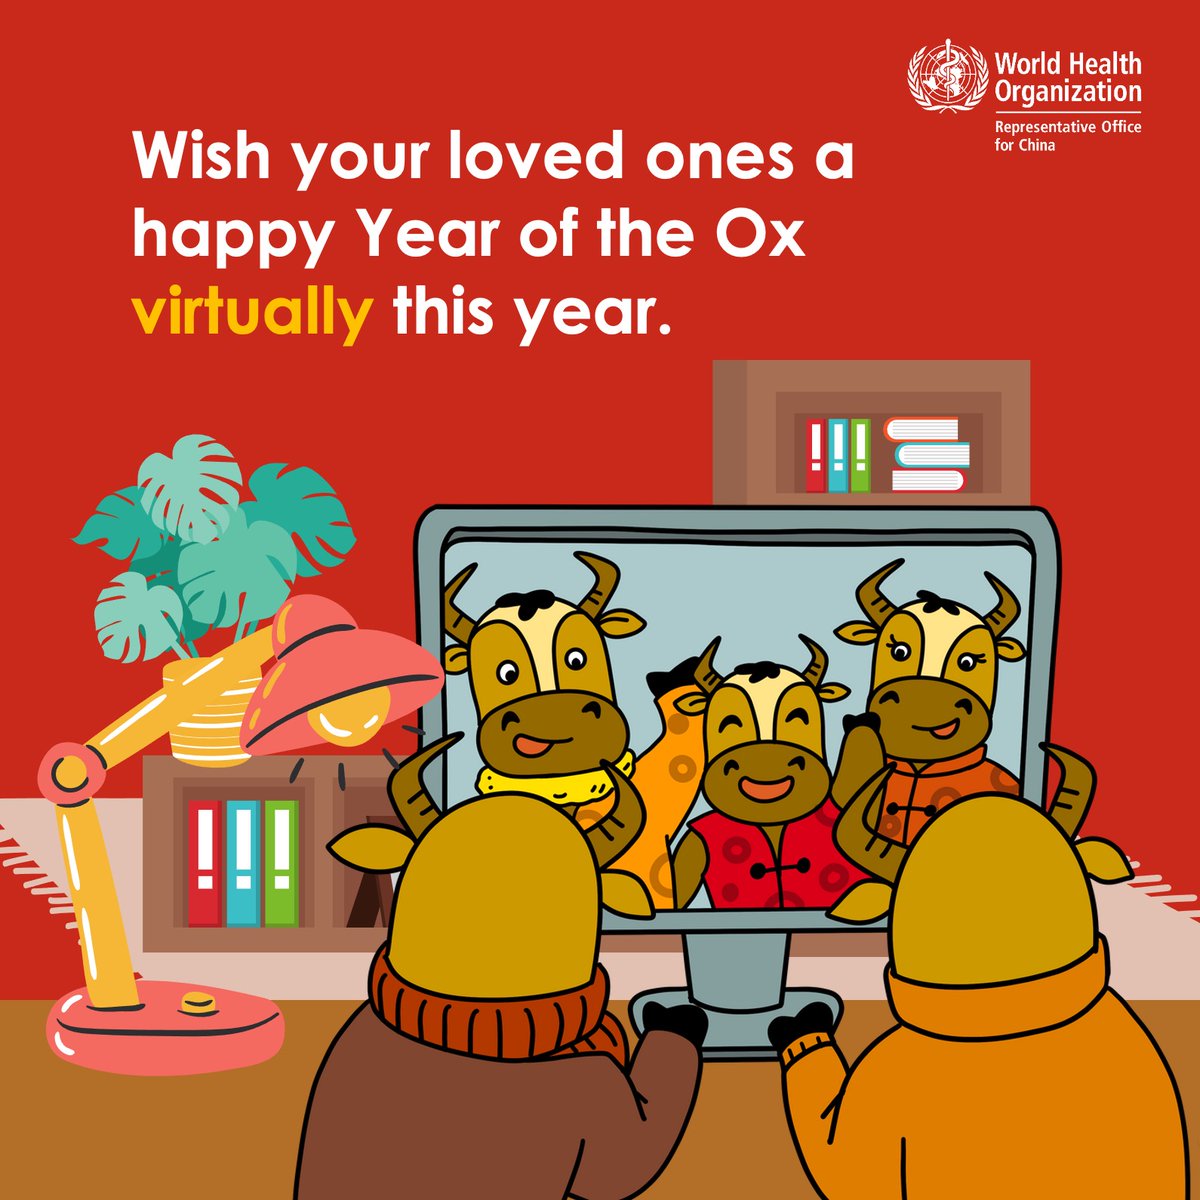 Celebrate  #LunarNewYear   virtually  if  #COVID19 is spreading in your community #YearOfTheOx  